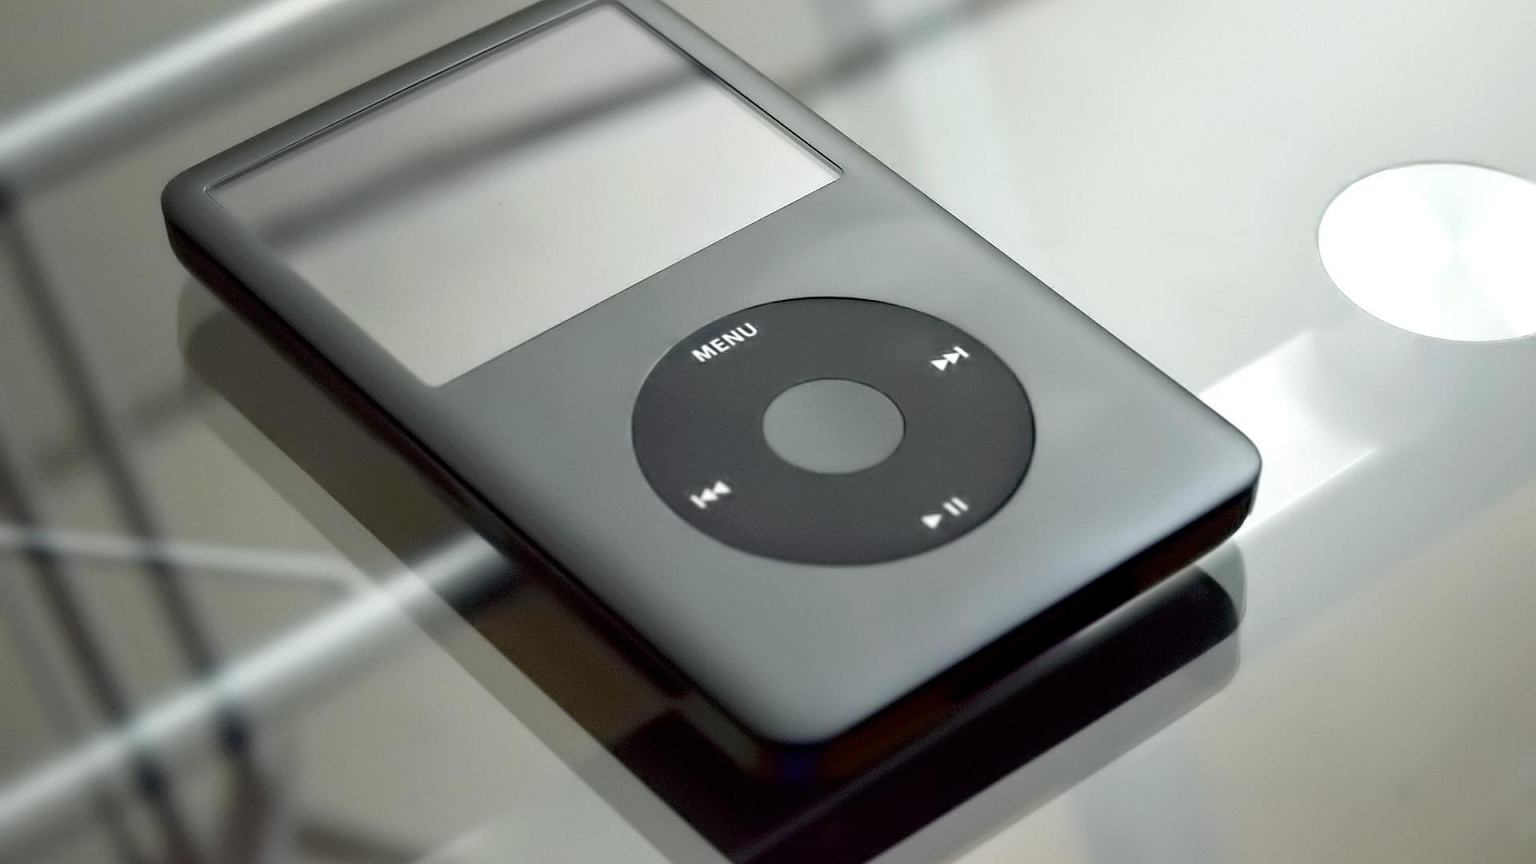 The iPod is placed in the history trash.  Apple ends production of the popular music player